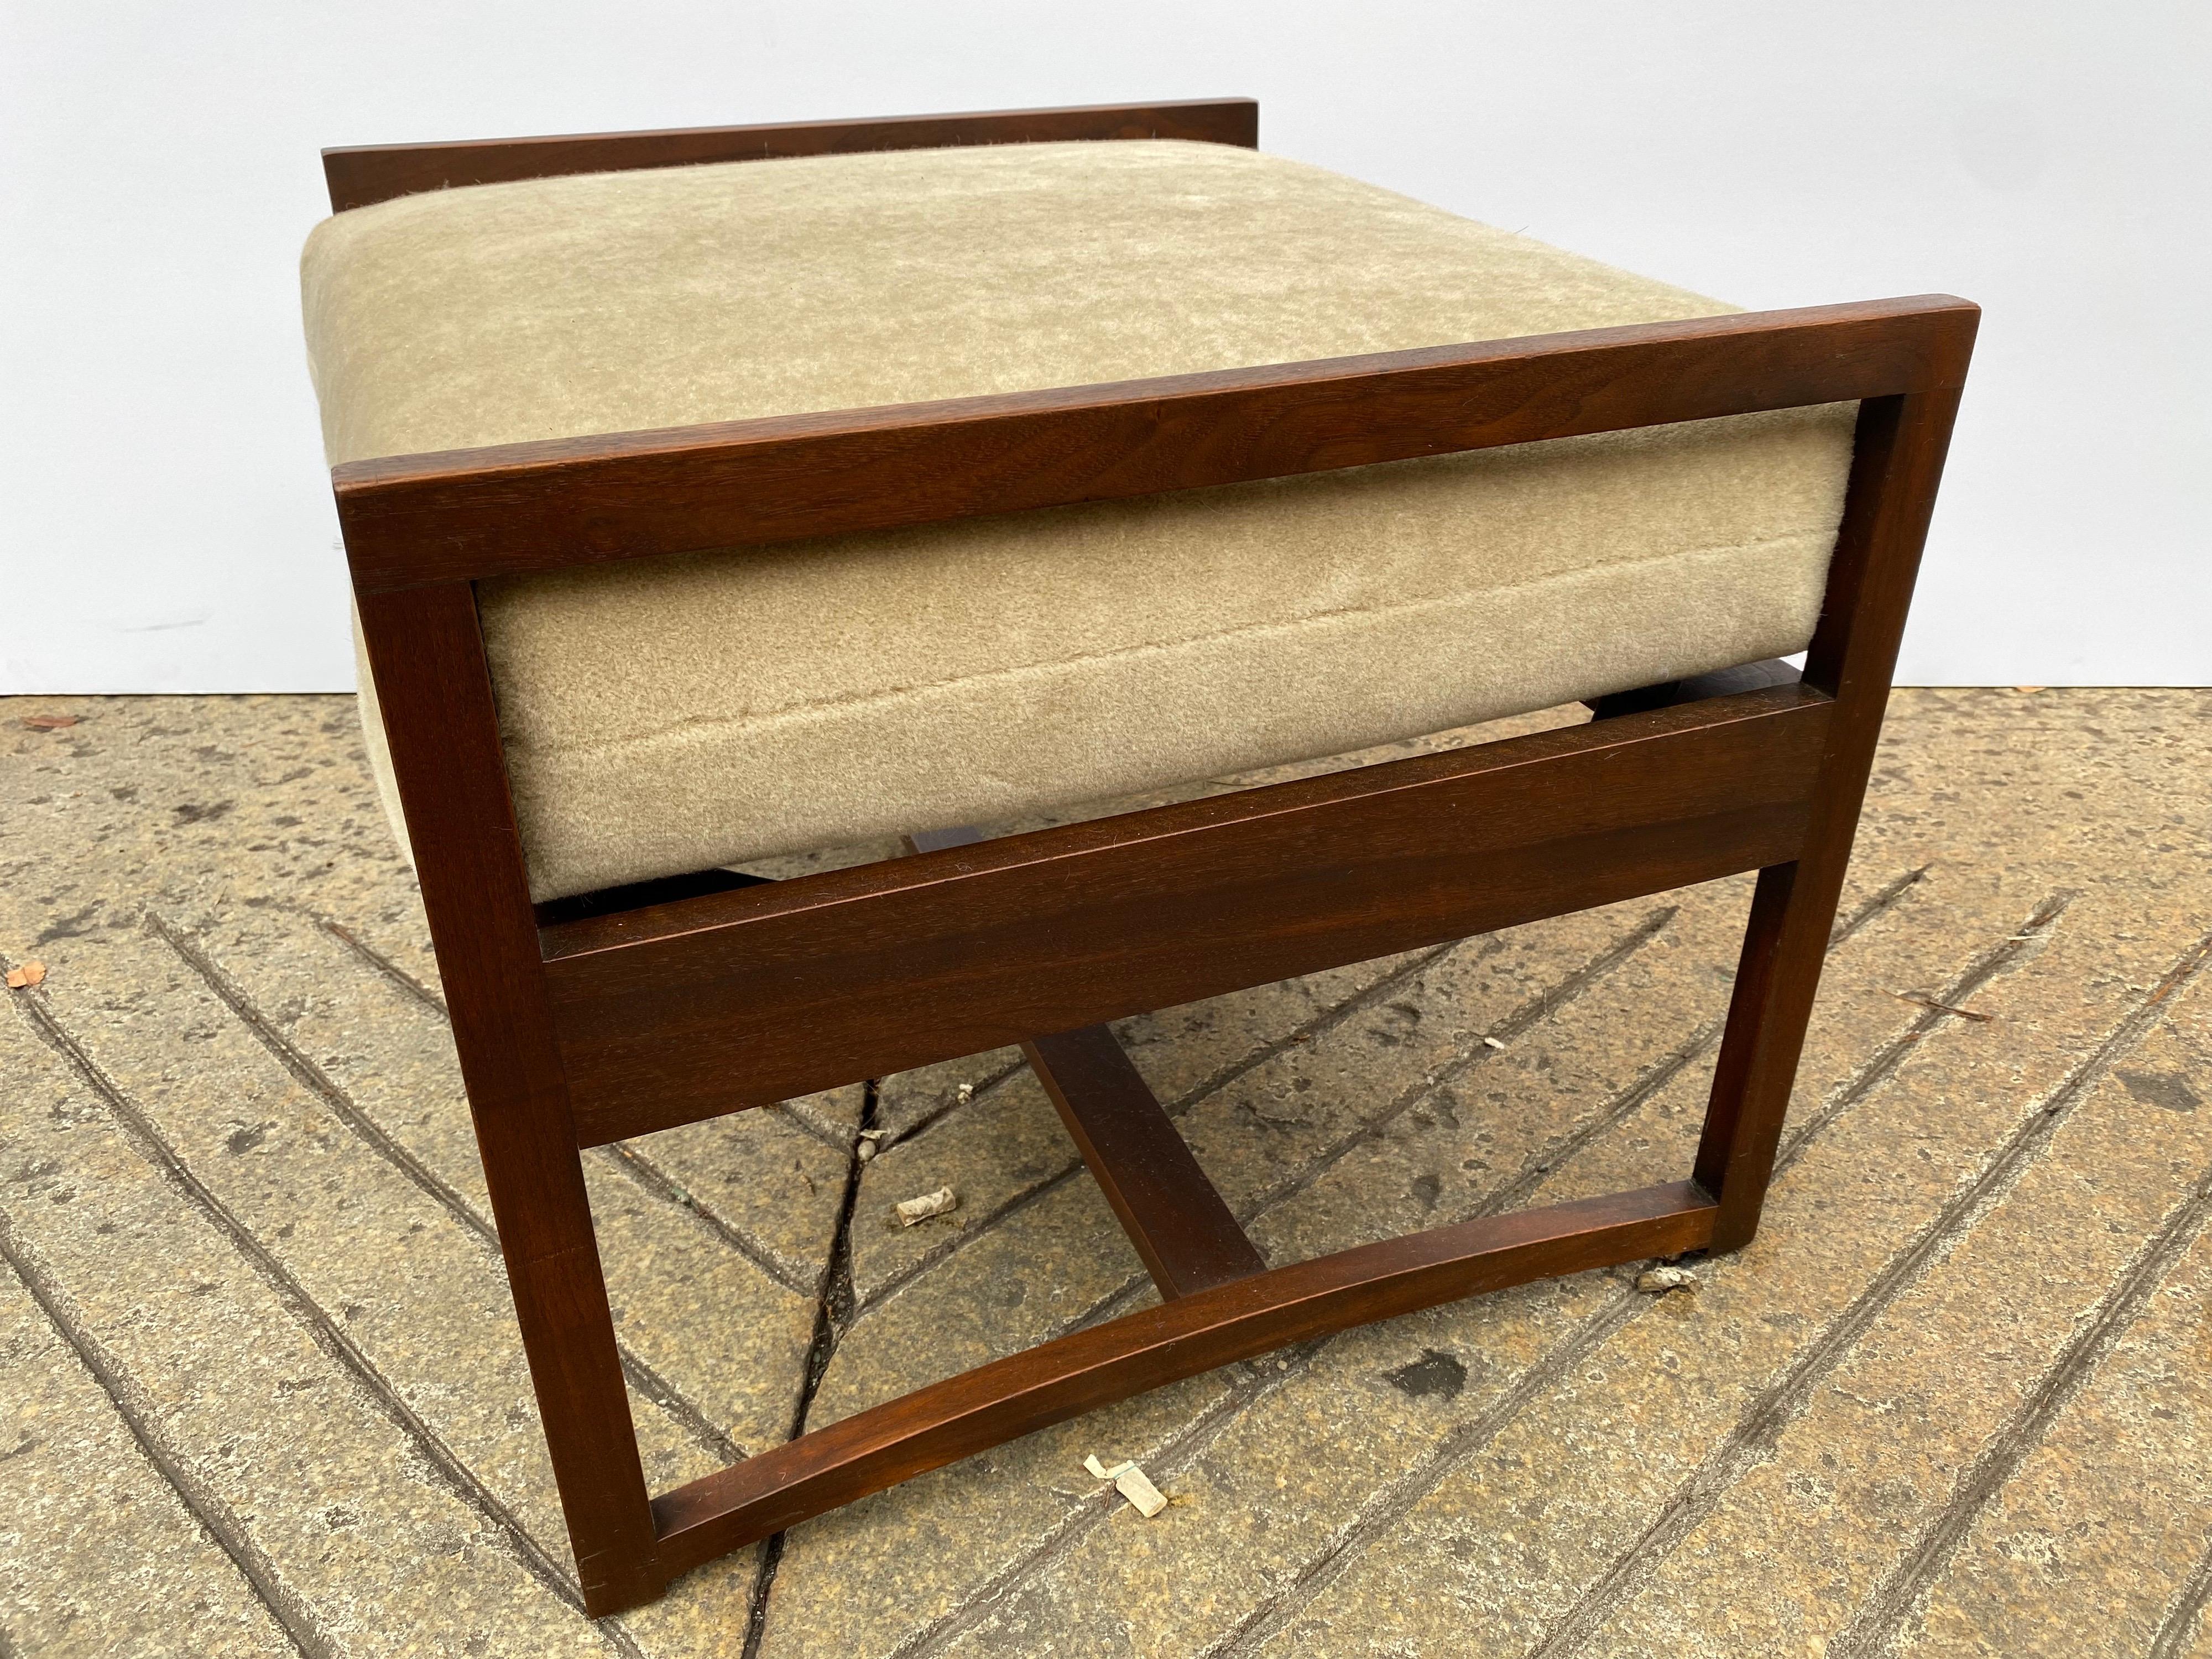 Nice Ample Sized ottoman, newly replaced straps and new Mohair Cushion gives this piece of furniture a luxurious feel! Original finish on wood shows one slight mark as seen in photos.